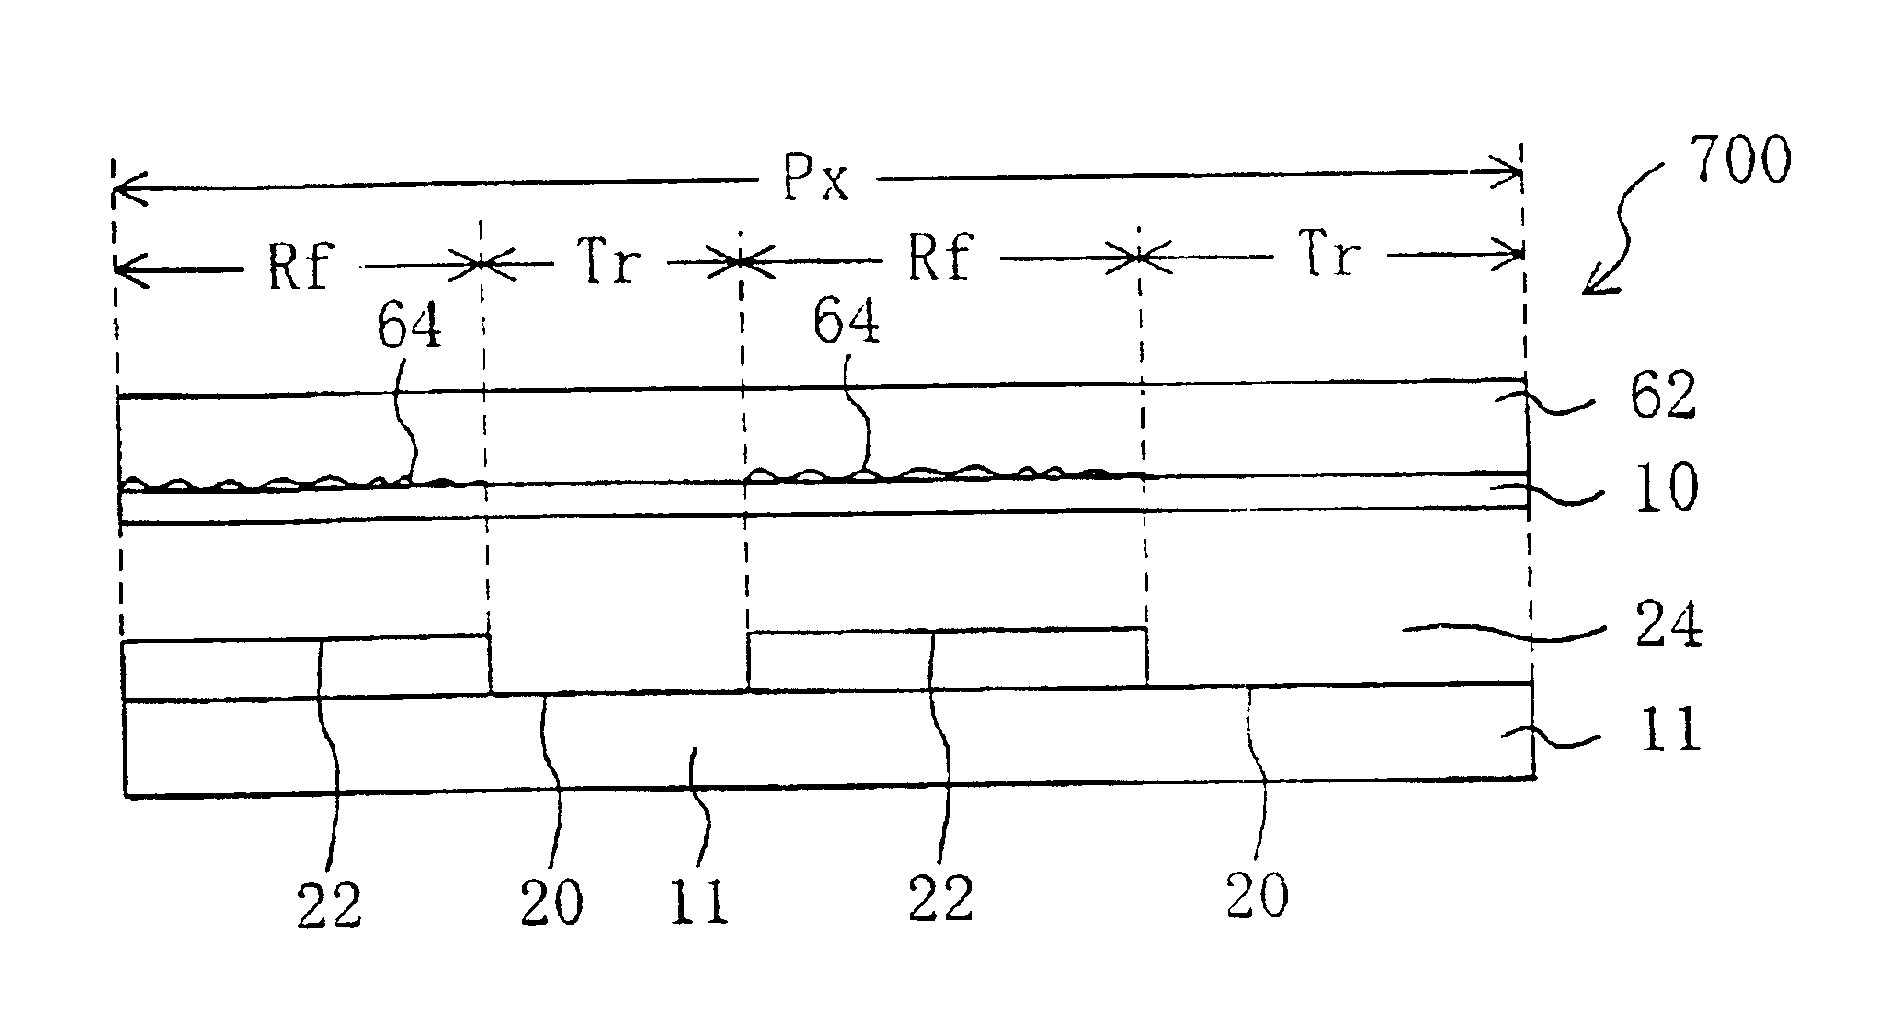 Liquid crystal display device with a light diffusion layer in the reflection region alone